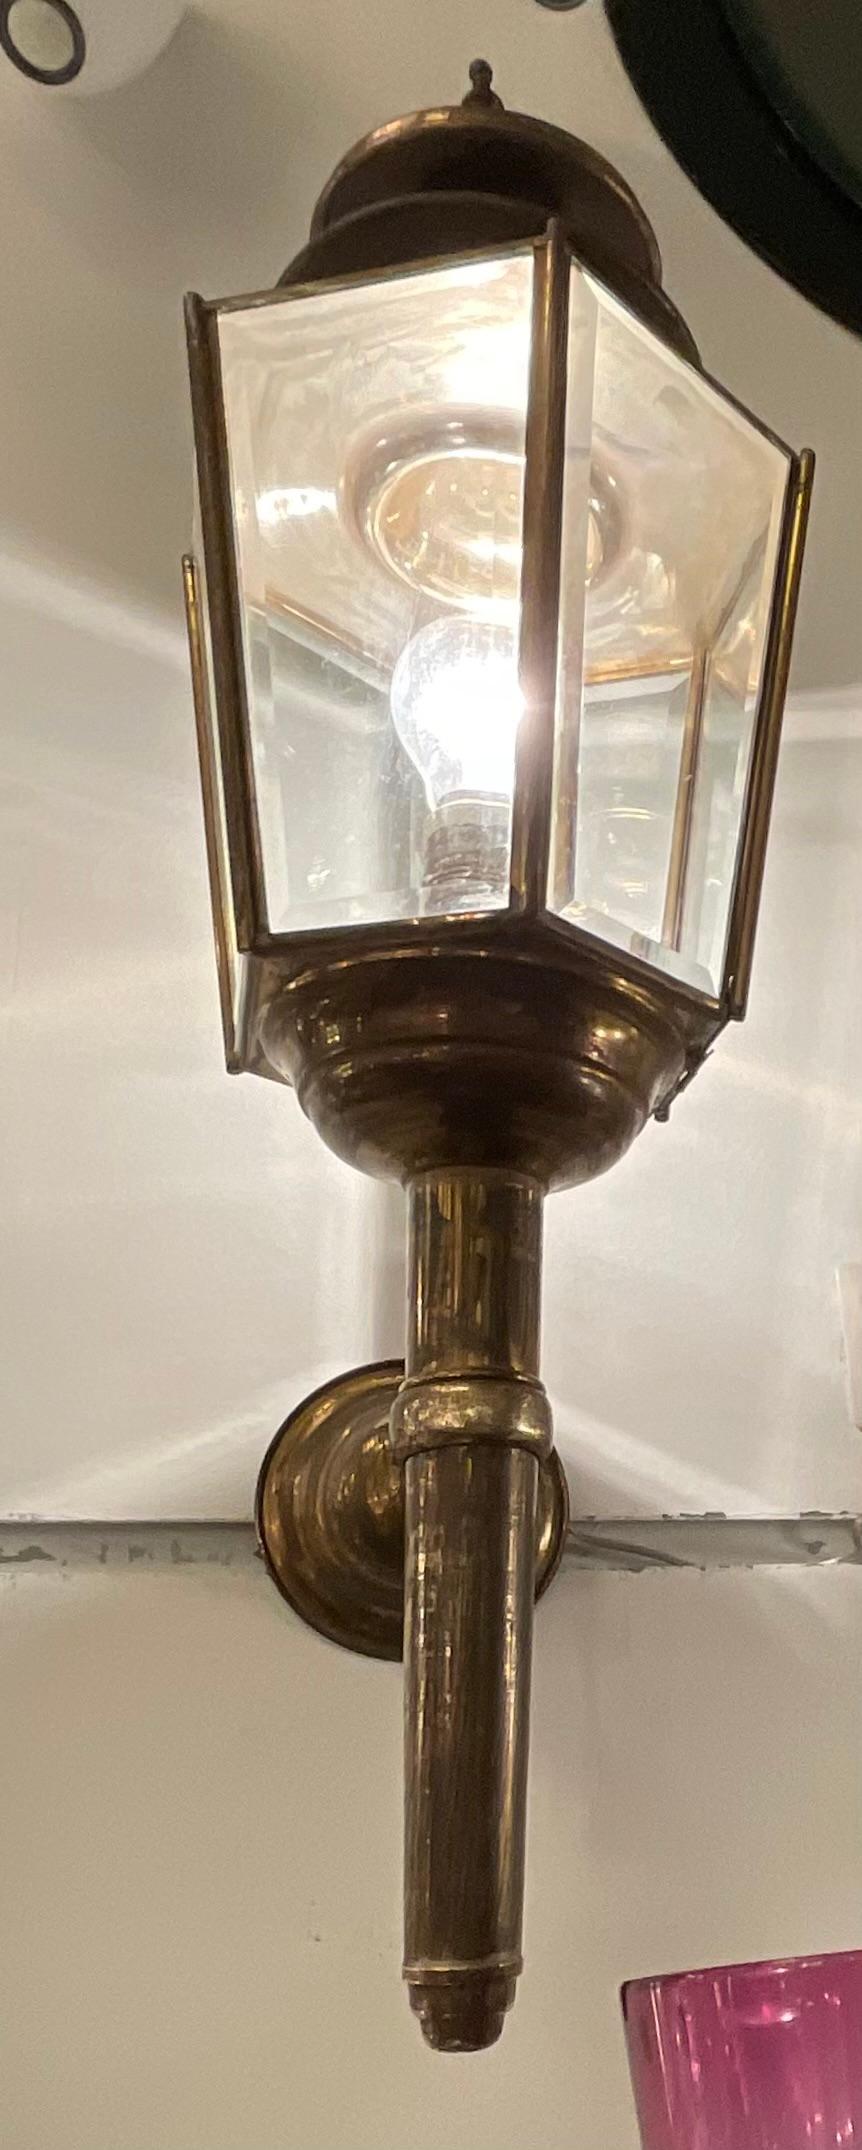 Important pair of large sconces or lanterns, both for indoor and outdoor use in a prestigious Milanese mansion, where they come from, were designed by Pietro Chiesa when he worked for Fontanarte.
Top-quality materials, brass and beveled glass,  by